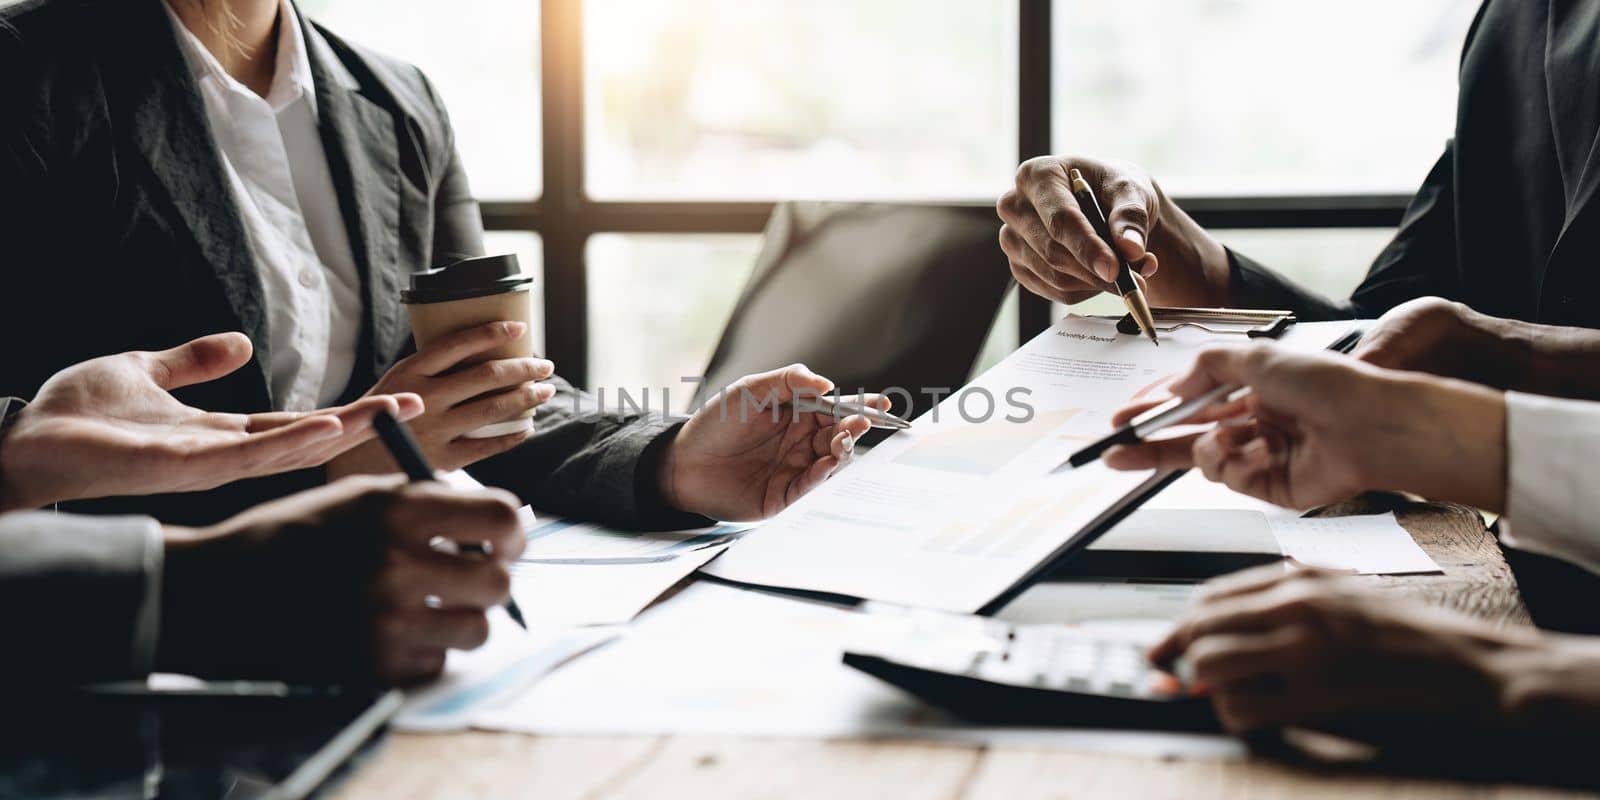 Business team meeting and presenting business results discussion and analysis data chart and graph, finance and accounting. Business performance concept